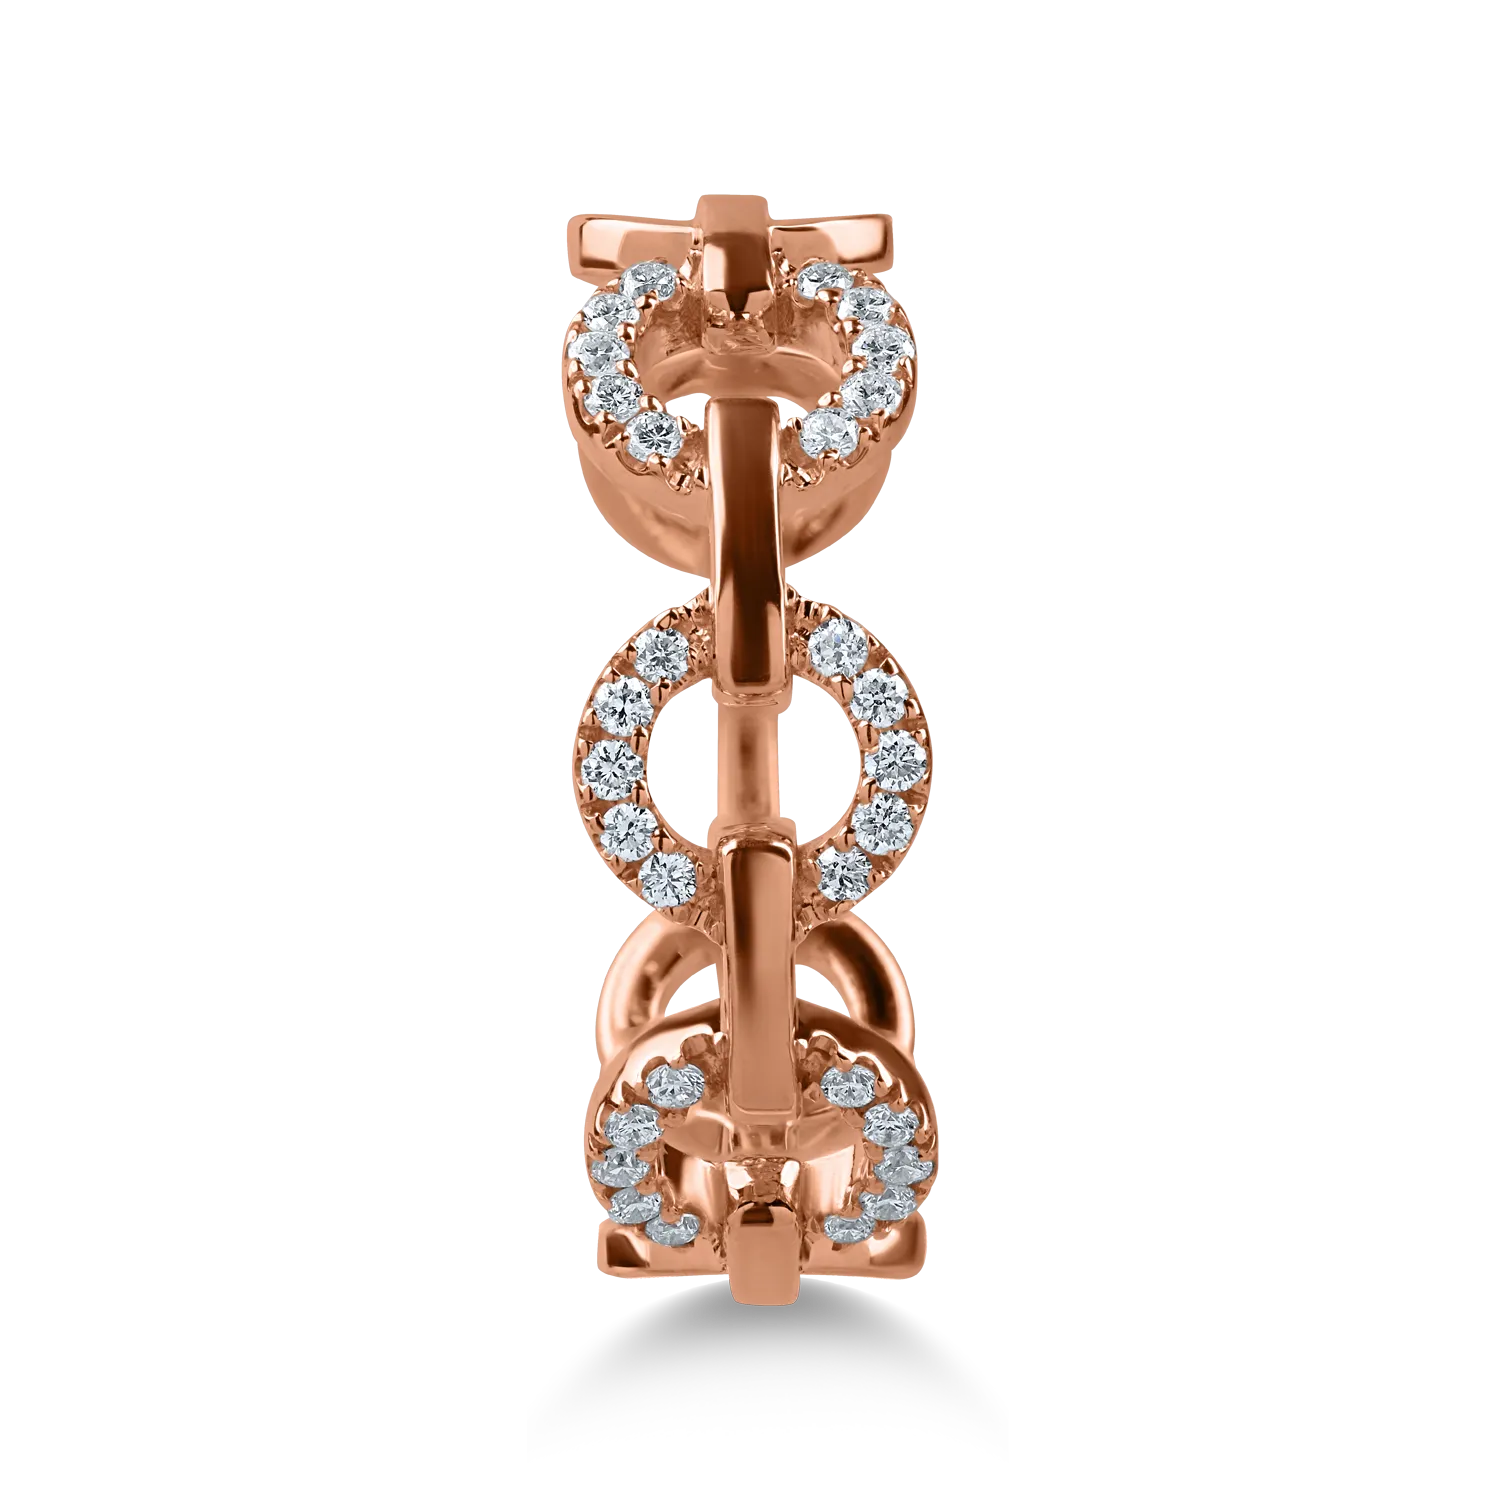 Microsetting ring with rose gold links and 0.15ct diamonds